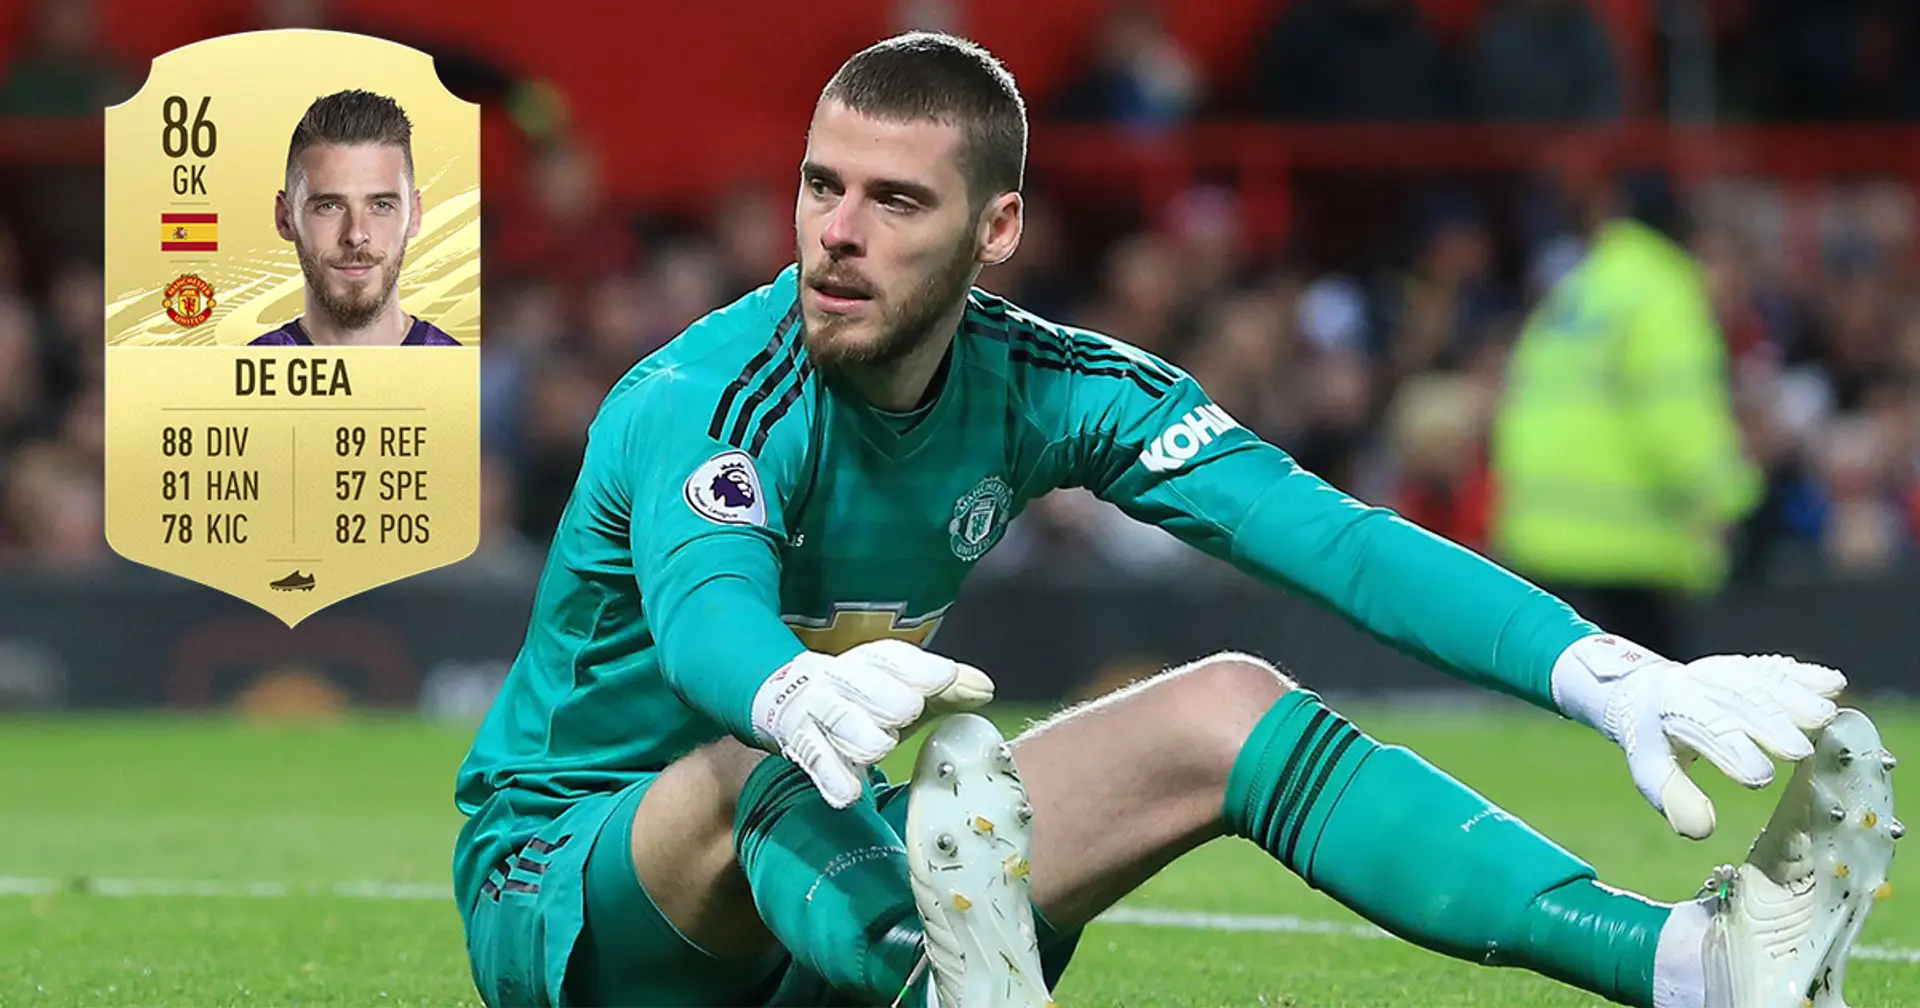 FIFA 21 ratings see David de Gea drop 7 positions down on list of best-rated goalkeepers